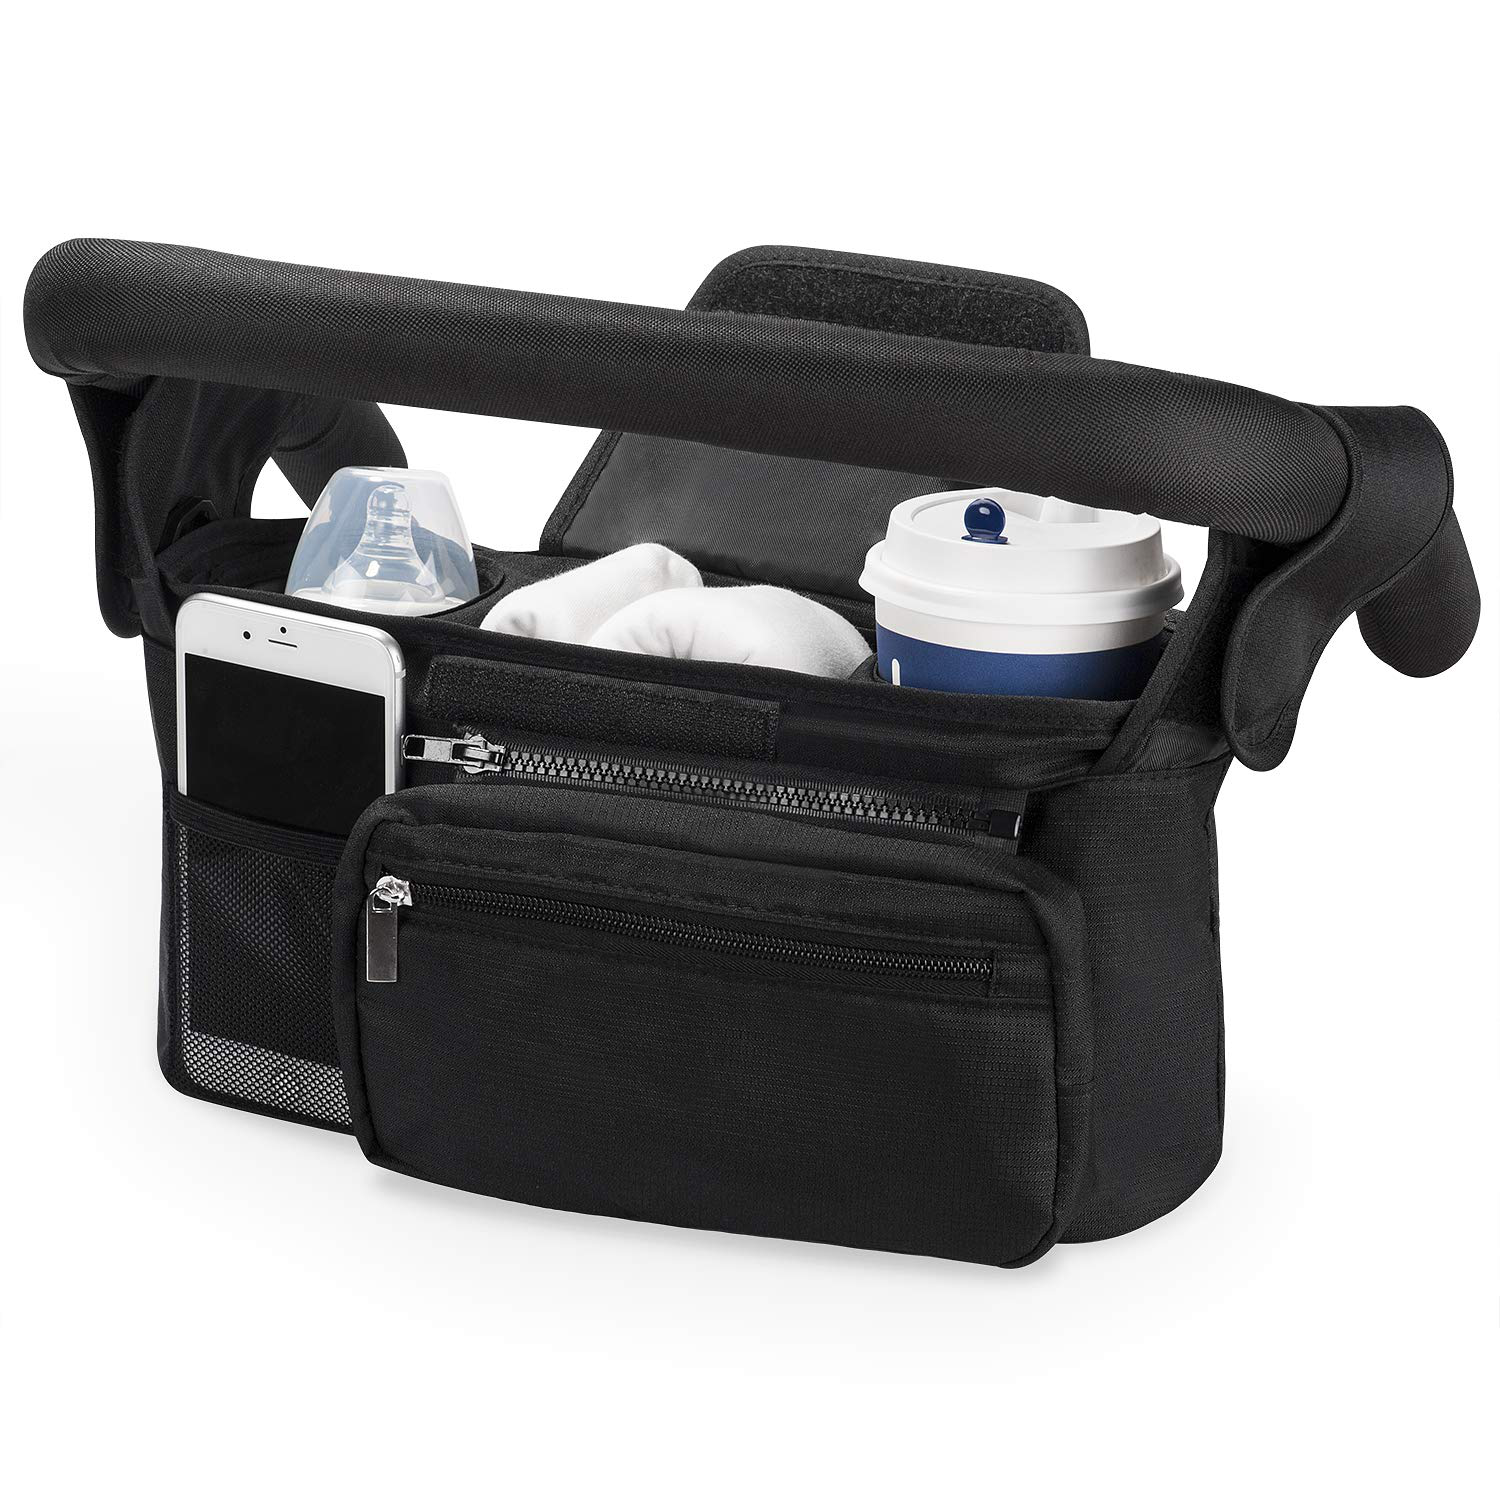 Universal Stroller Organizer with Insulated Cup Holder by Momcozy - Detachable Phone Bag & Shoulder Strap, Fits for Stroller like Uppababy, Baby Jogger, Britax, Bugaboo, BOB, Umbrella and Pet Stroller Animals & Pet Supplies > Pet Supplies > Dog Supplies > Dog Treadmills Momcozy Black  